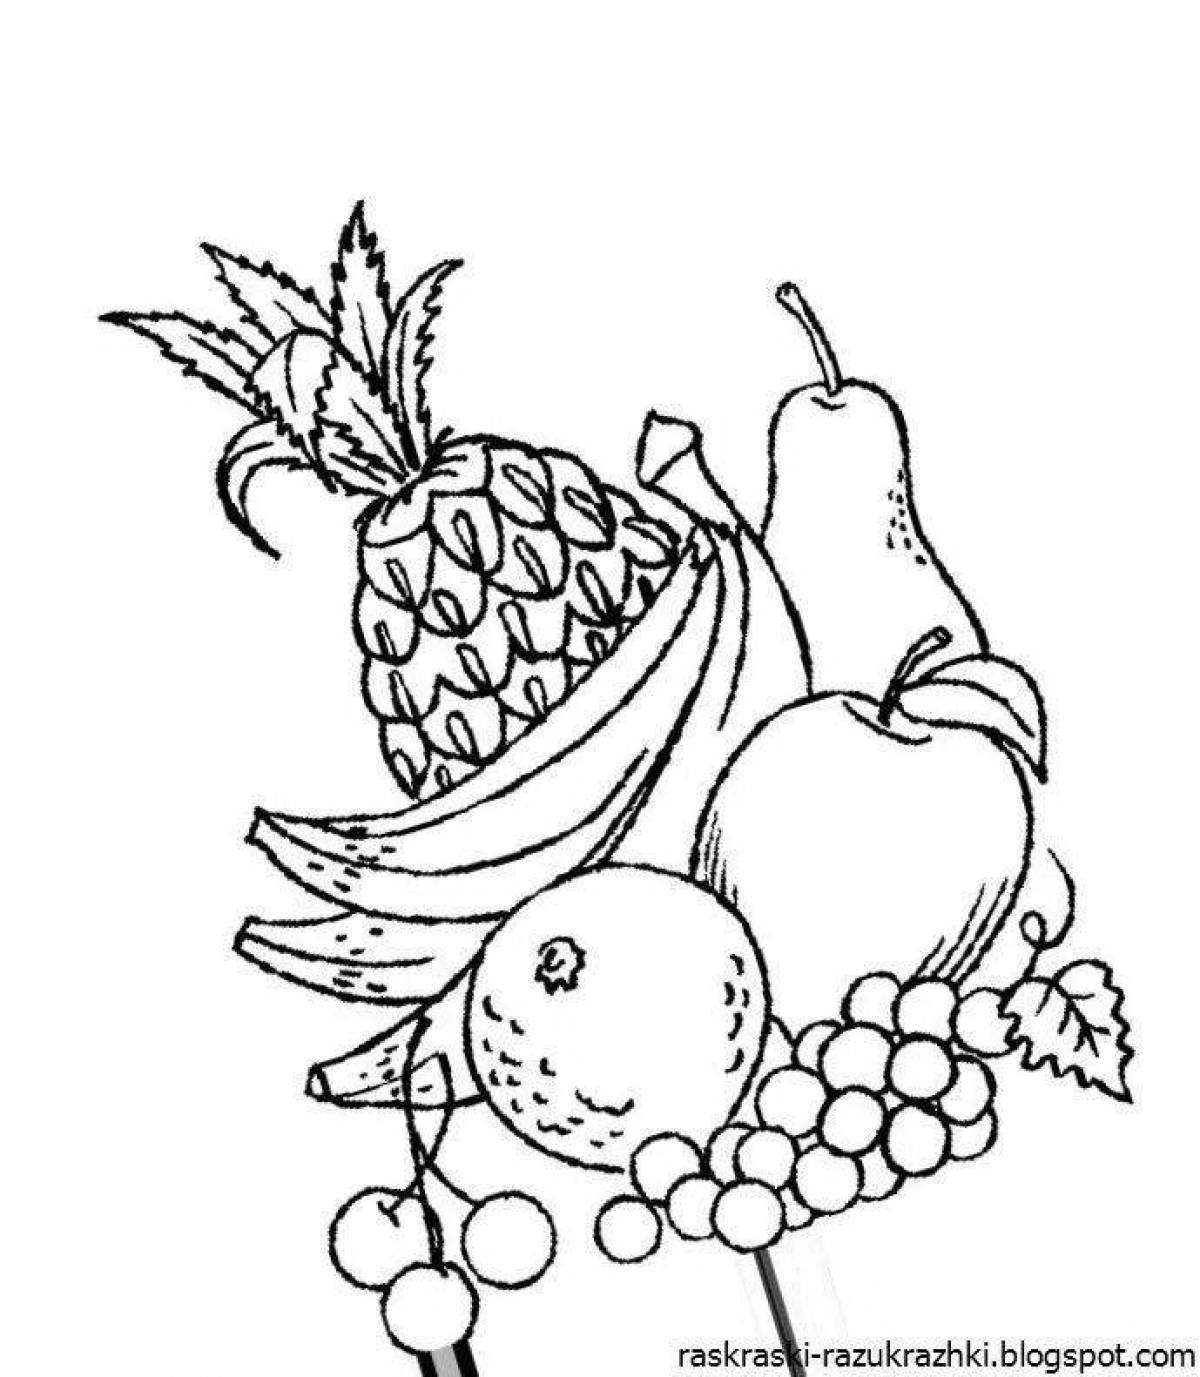 Colorful vegetable coloring book for kids